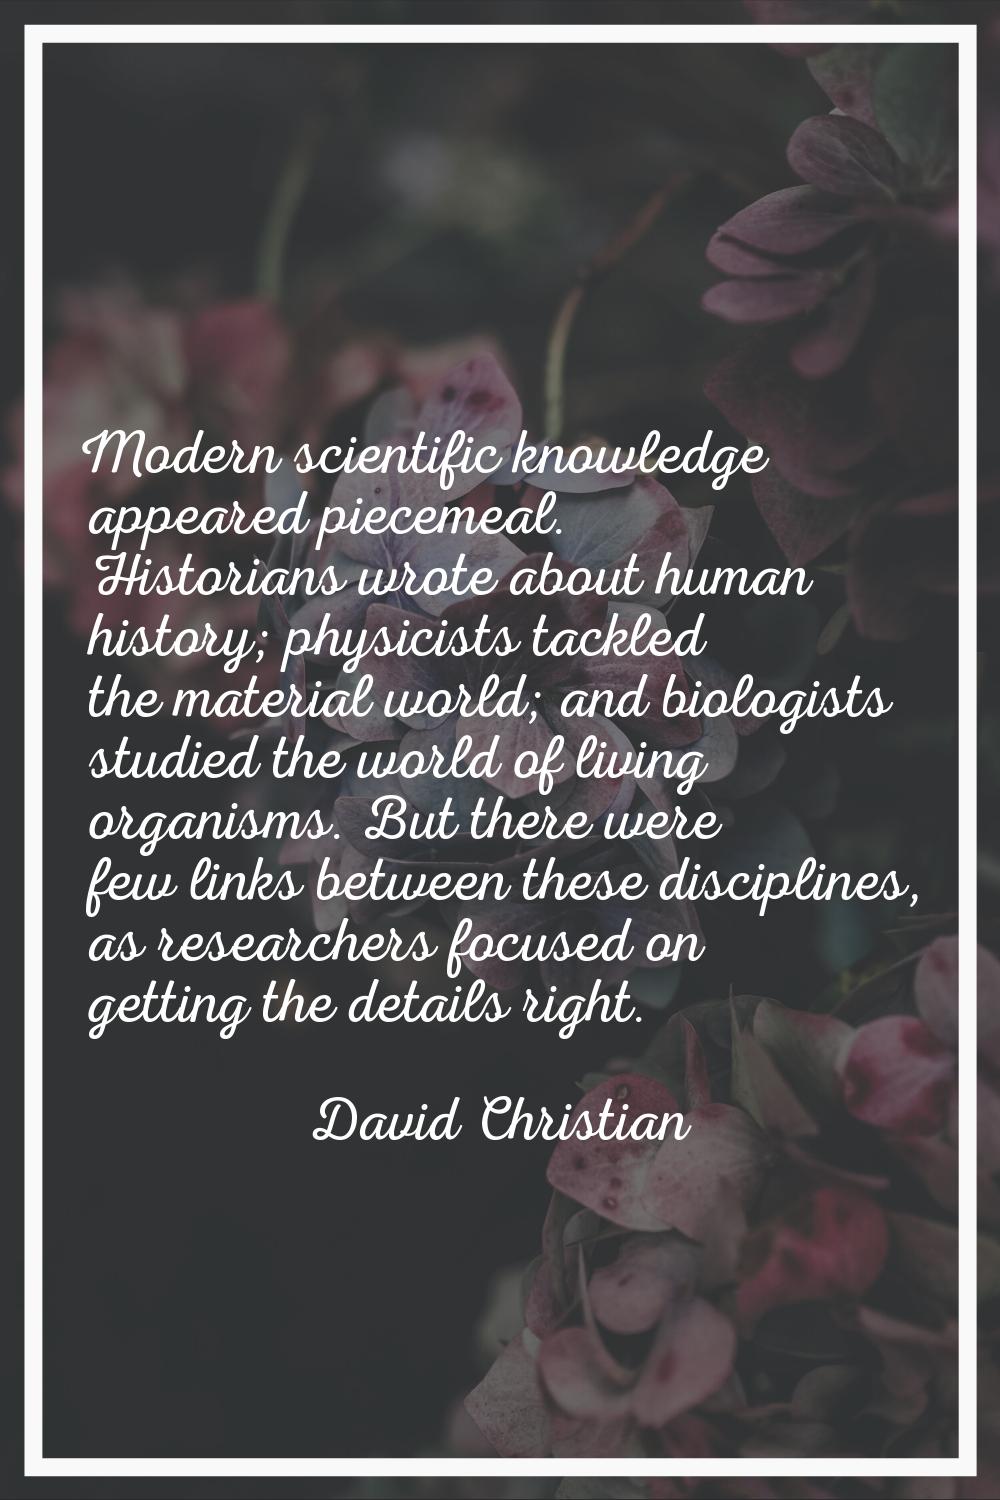 Modern scientific knowledge appeared piecemeal. Historians wrote about human history; physicists ta